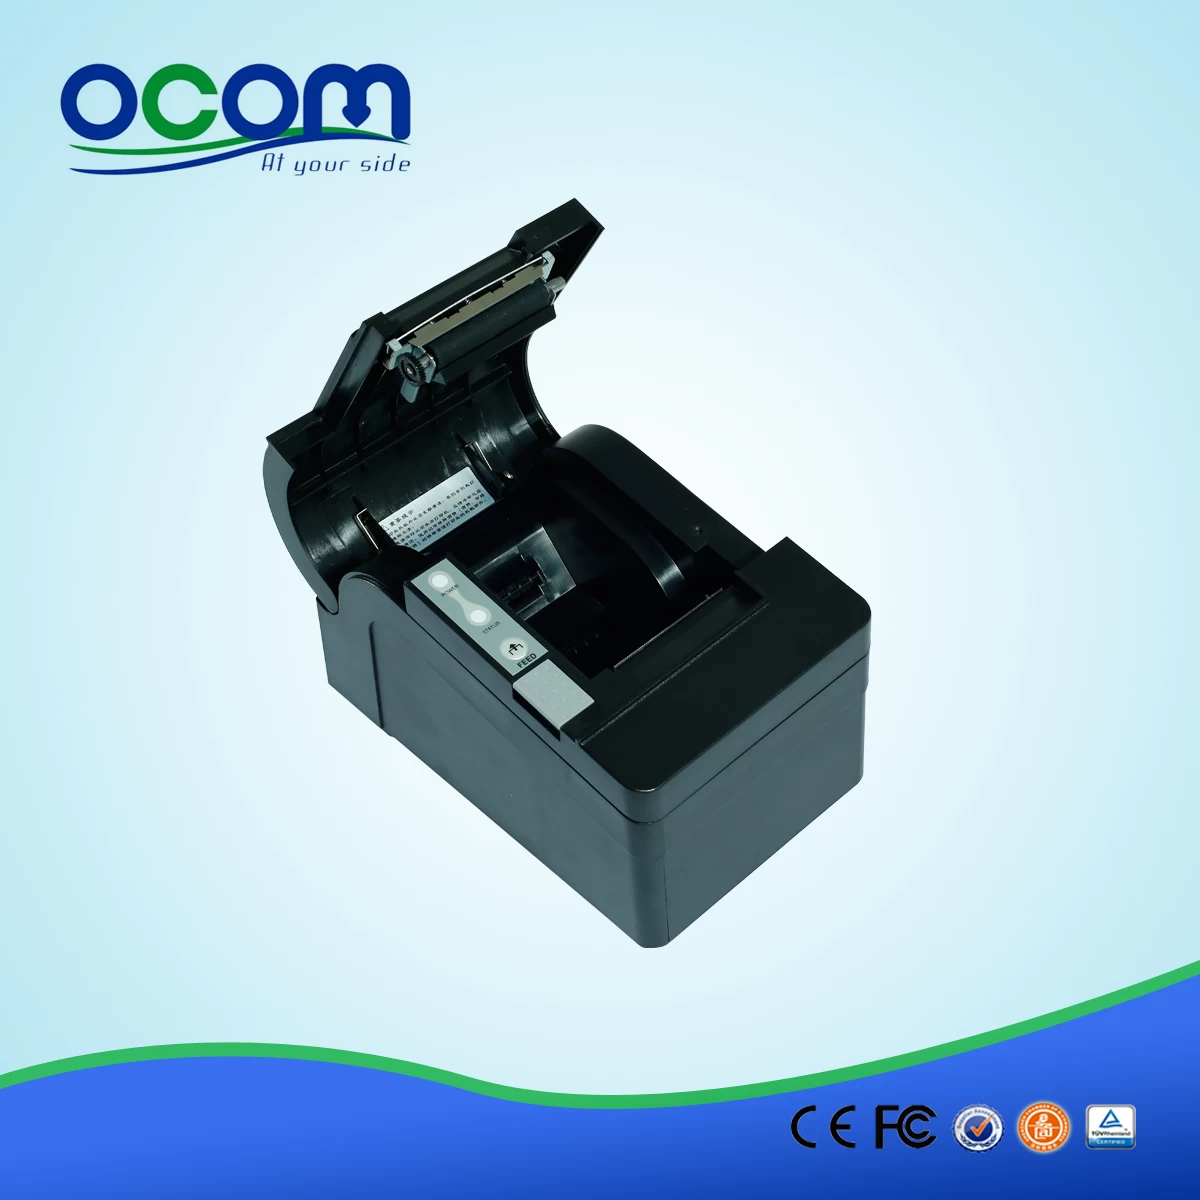 Chinese high performance 58mm auto cutter thermal receipt printer